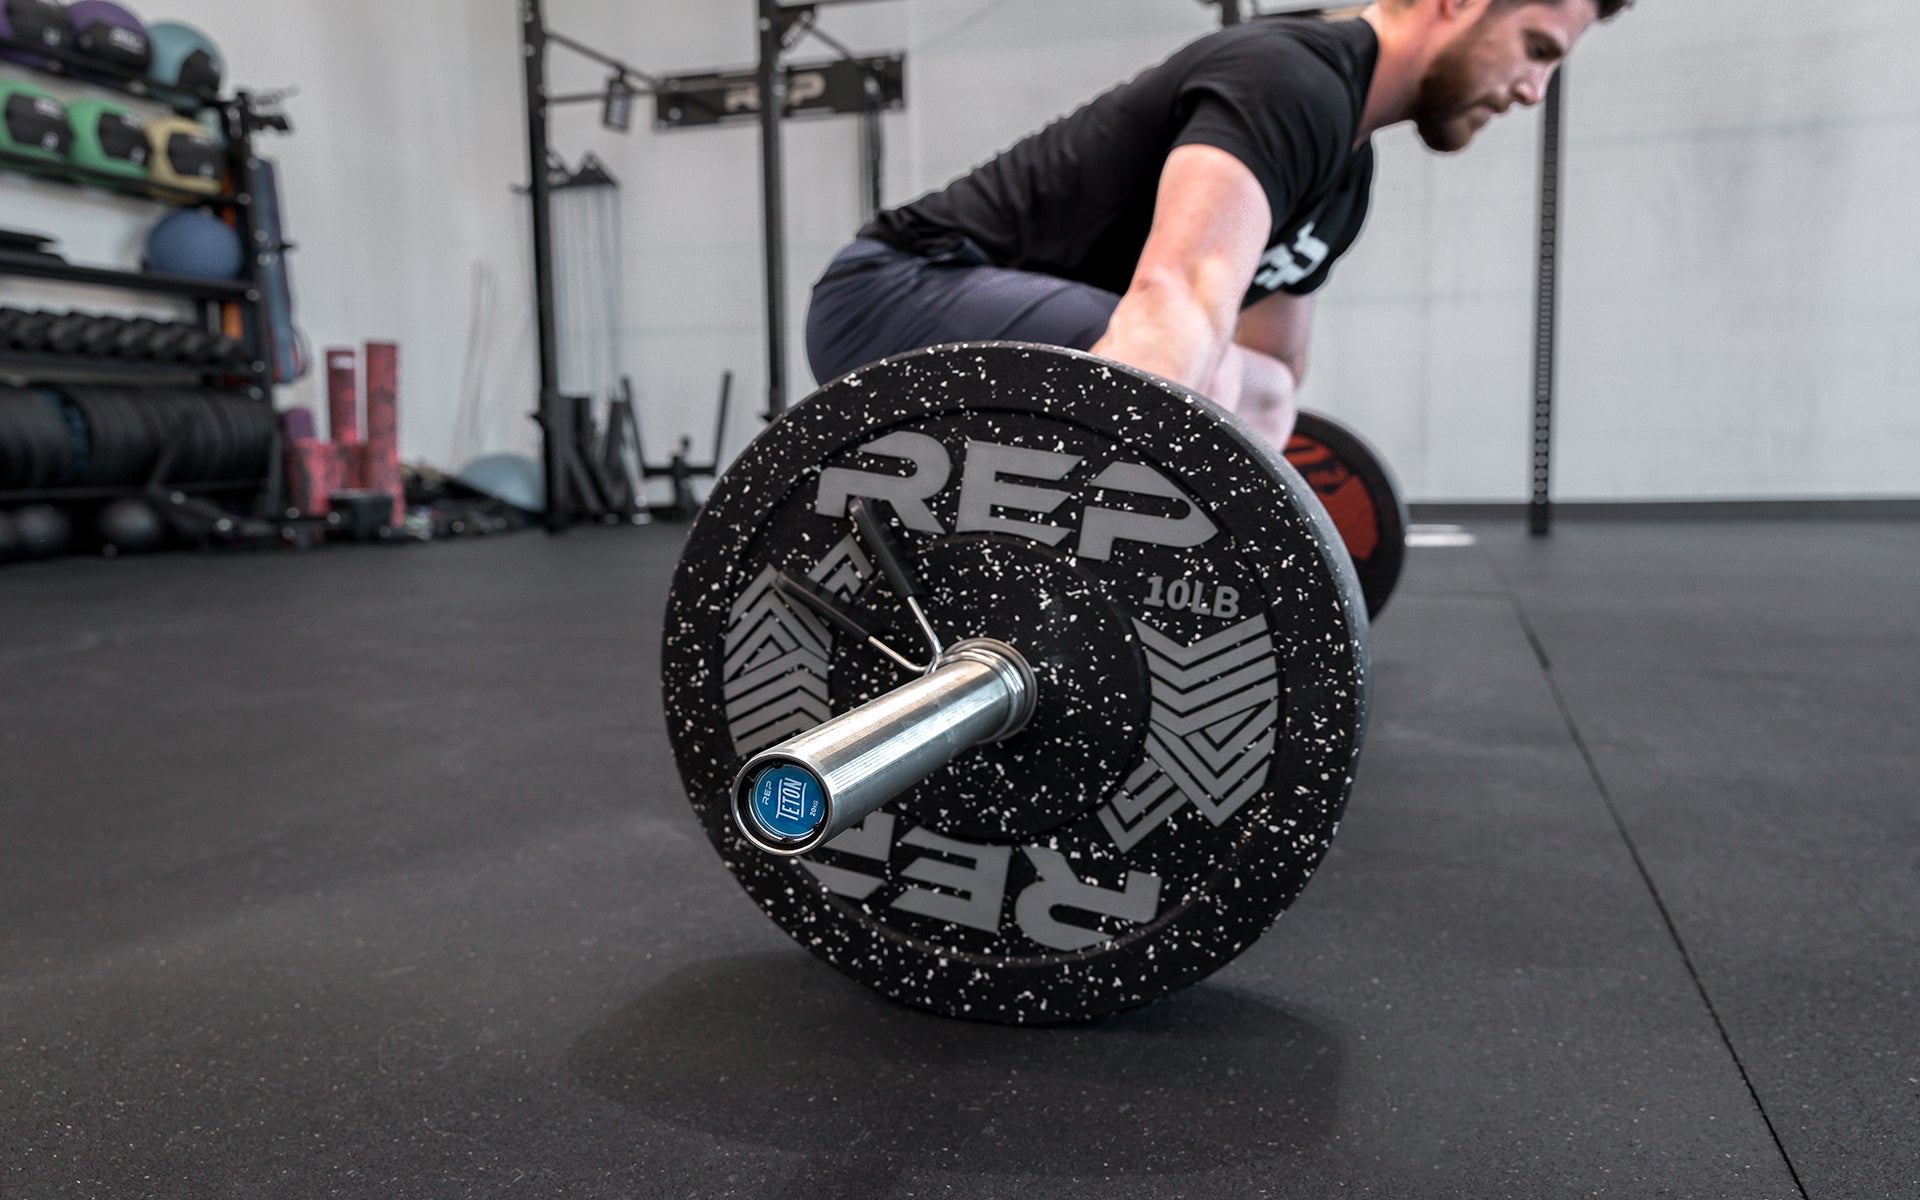 Side view of a male lifter setting up to perform a snatch with a loaded REP Teton Training Bar - 20kg.